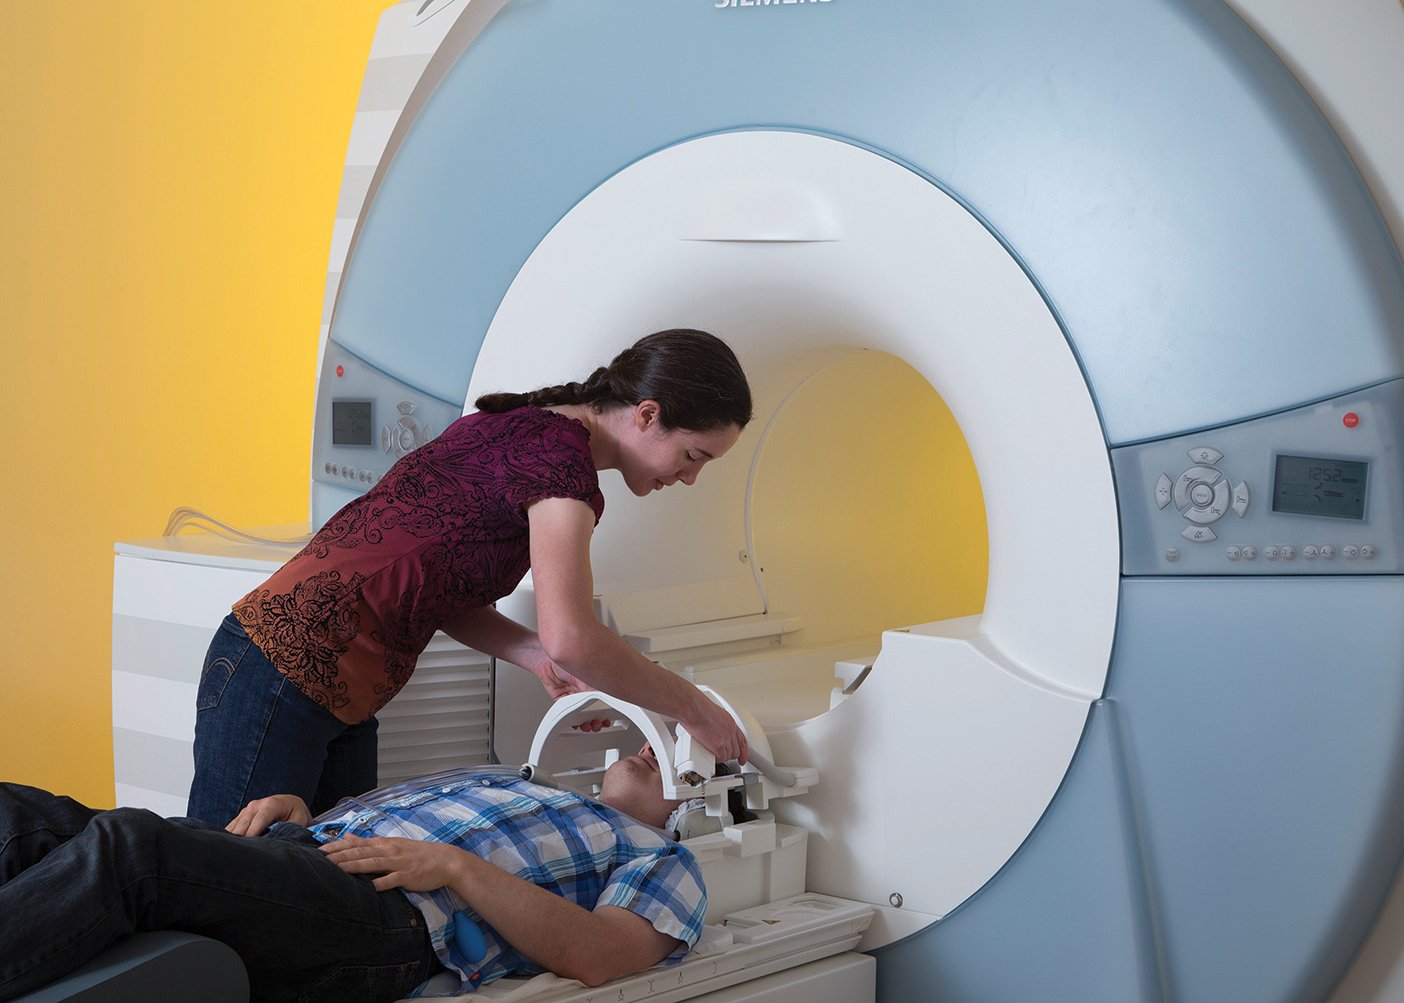 A person being prepared to go into an MRI machine